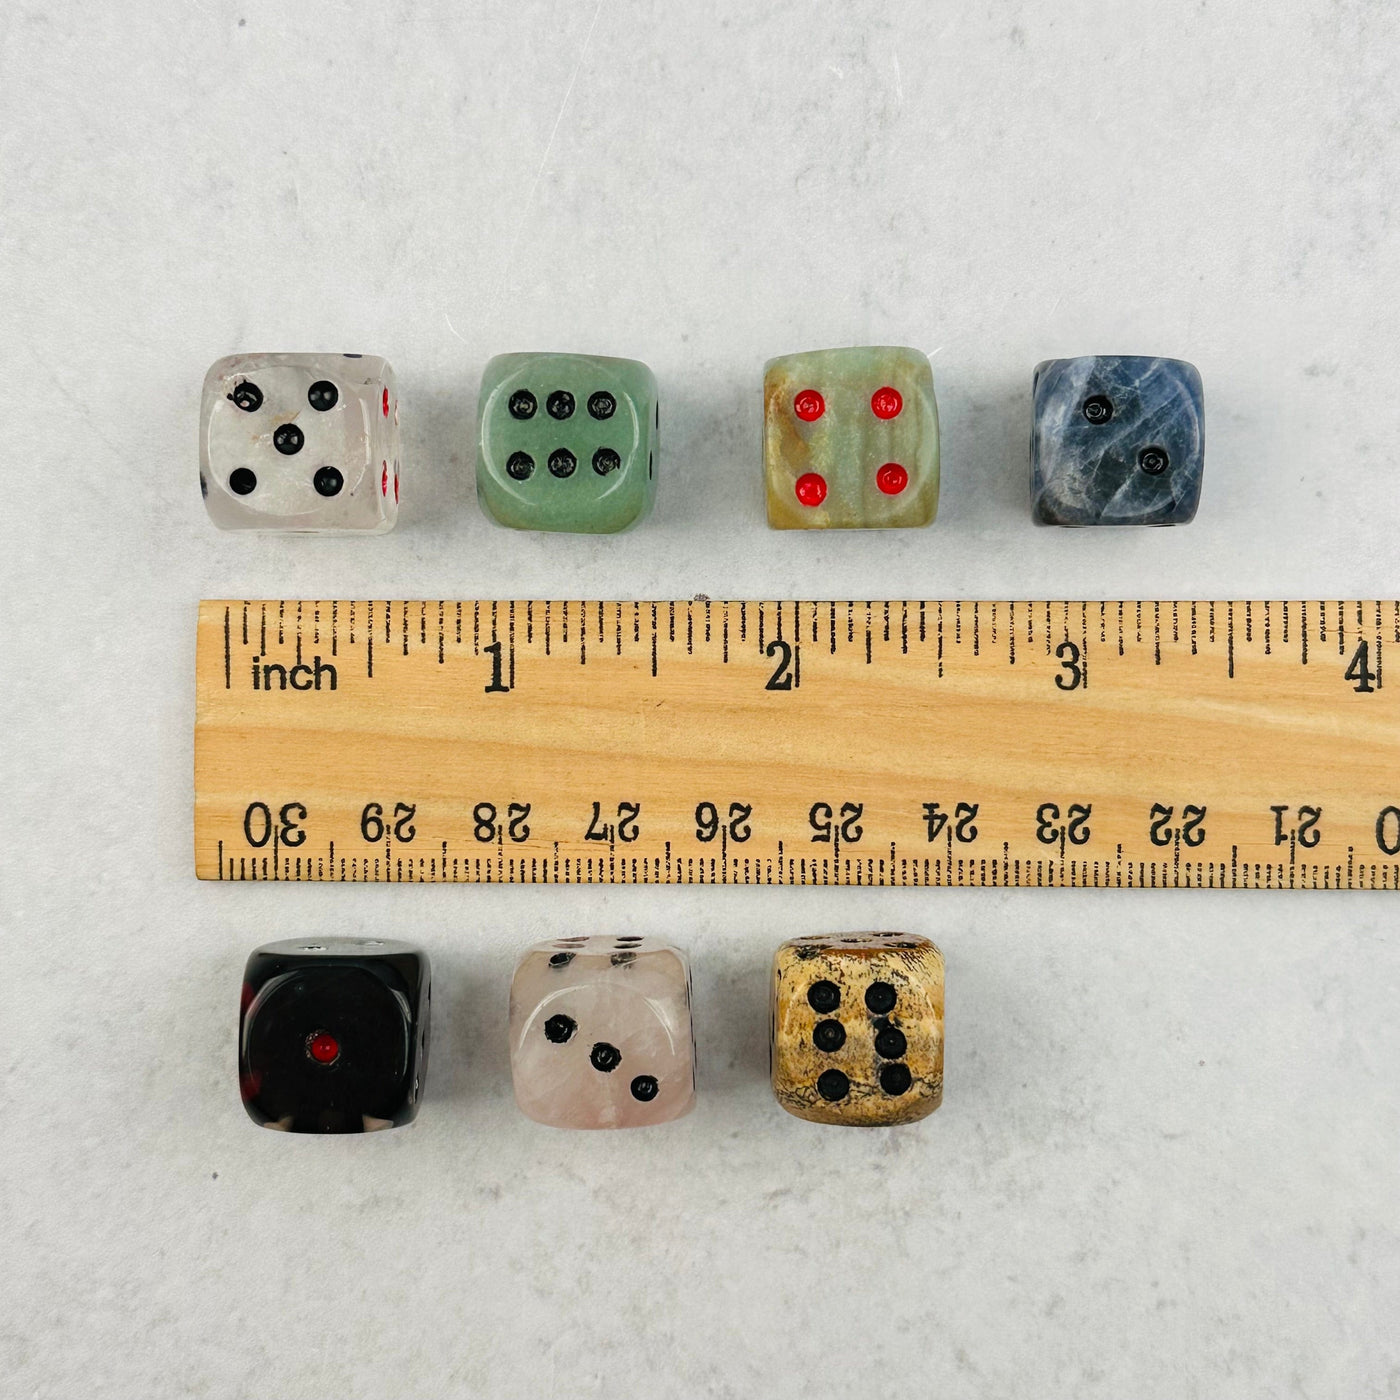 Gemstone Dice next to a ruler for size reference 